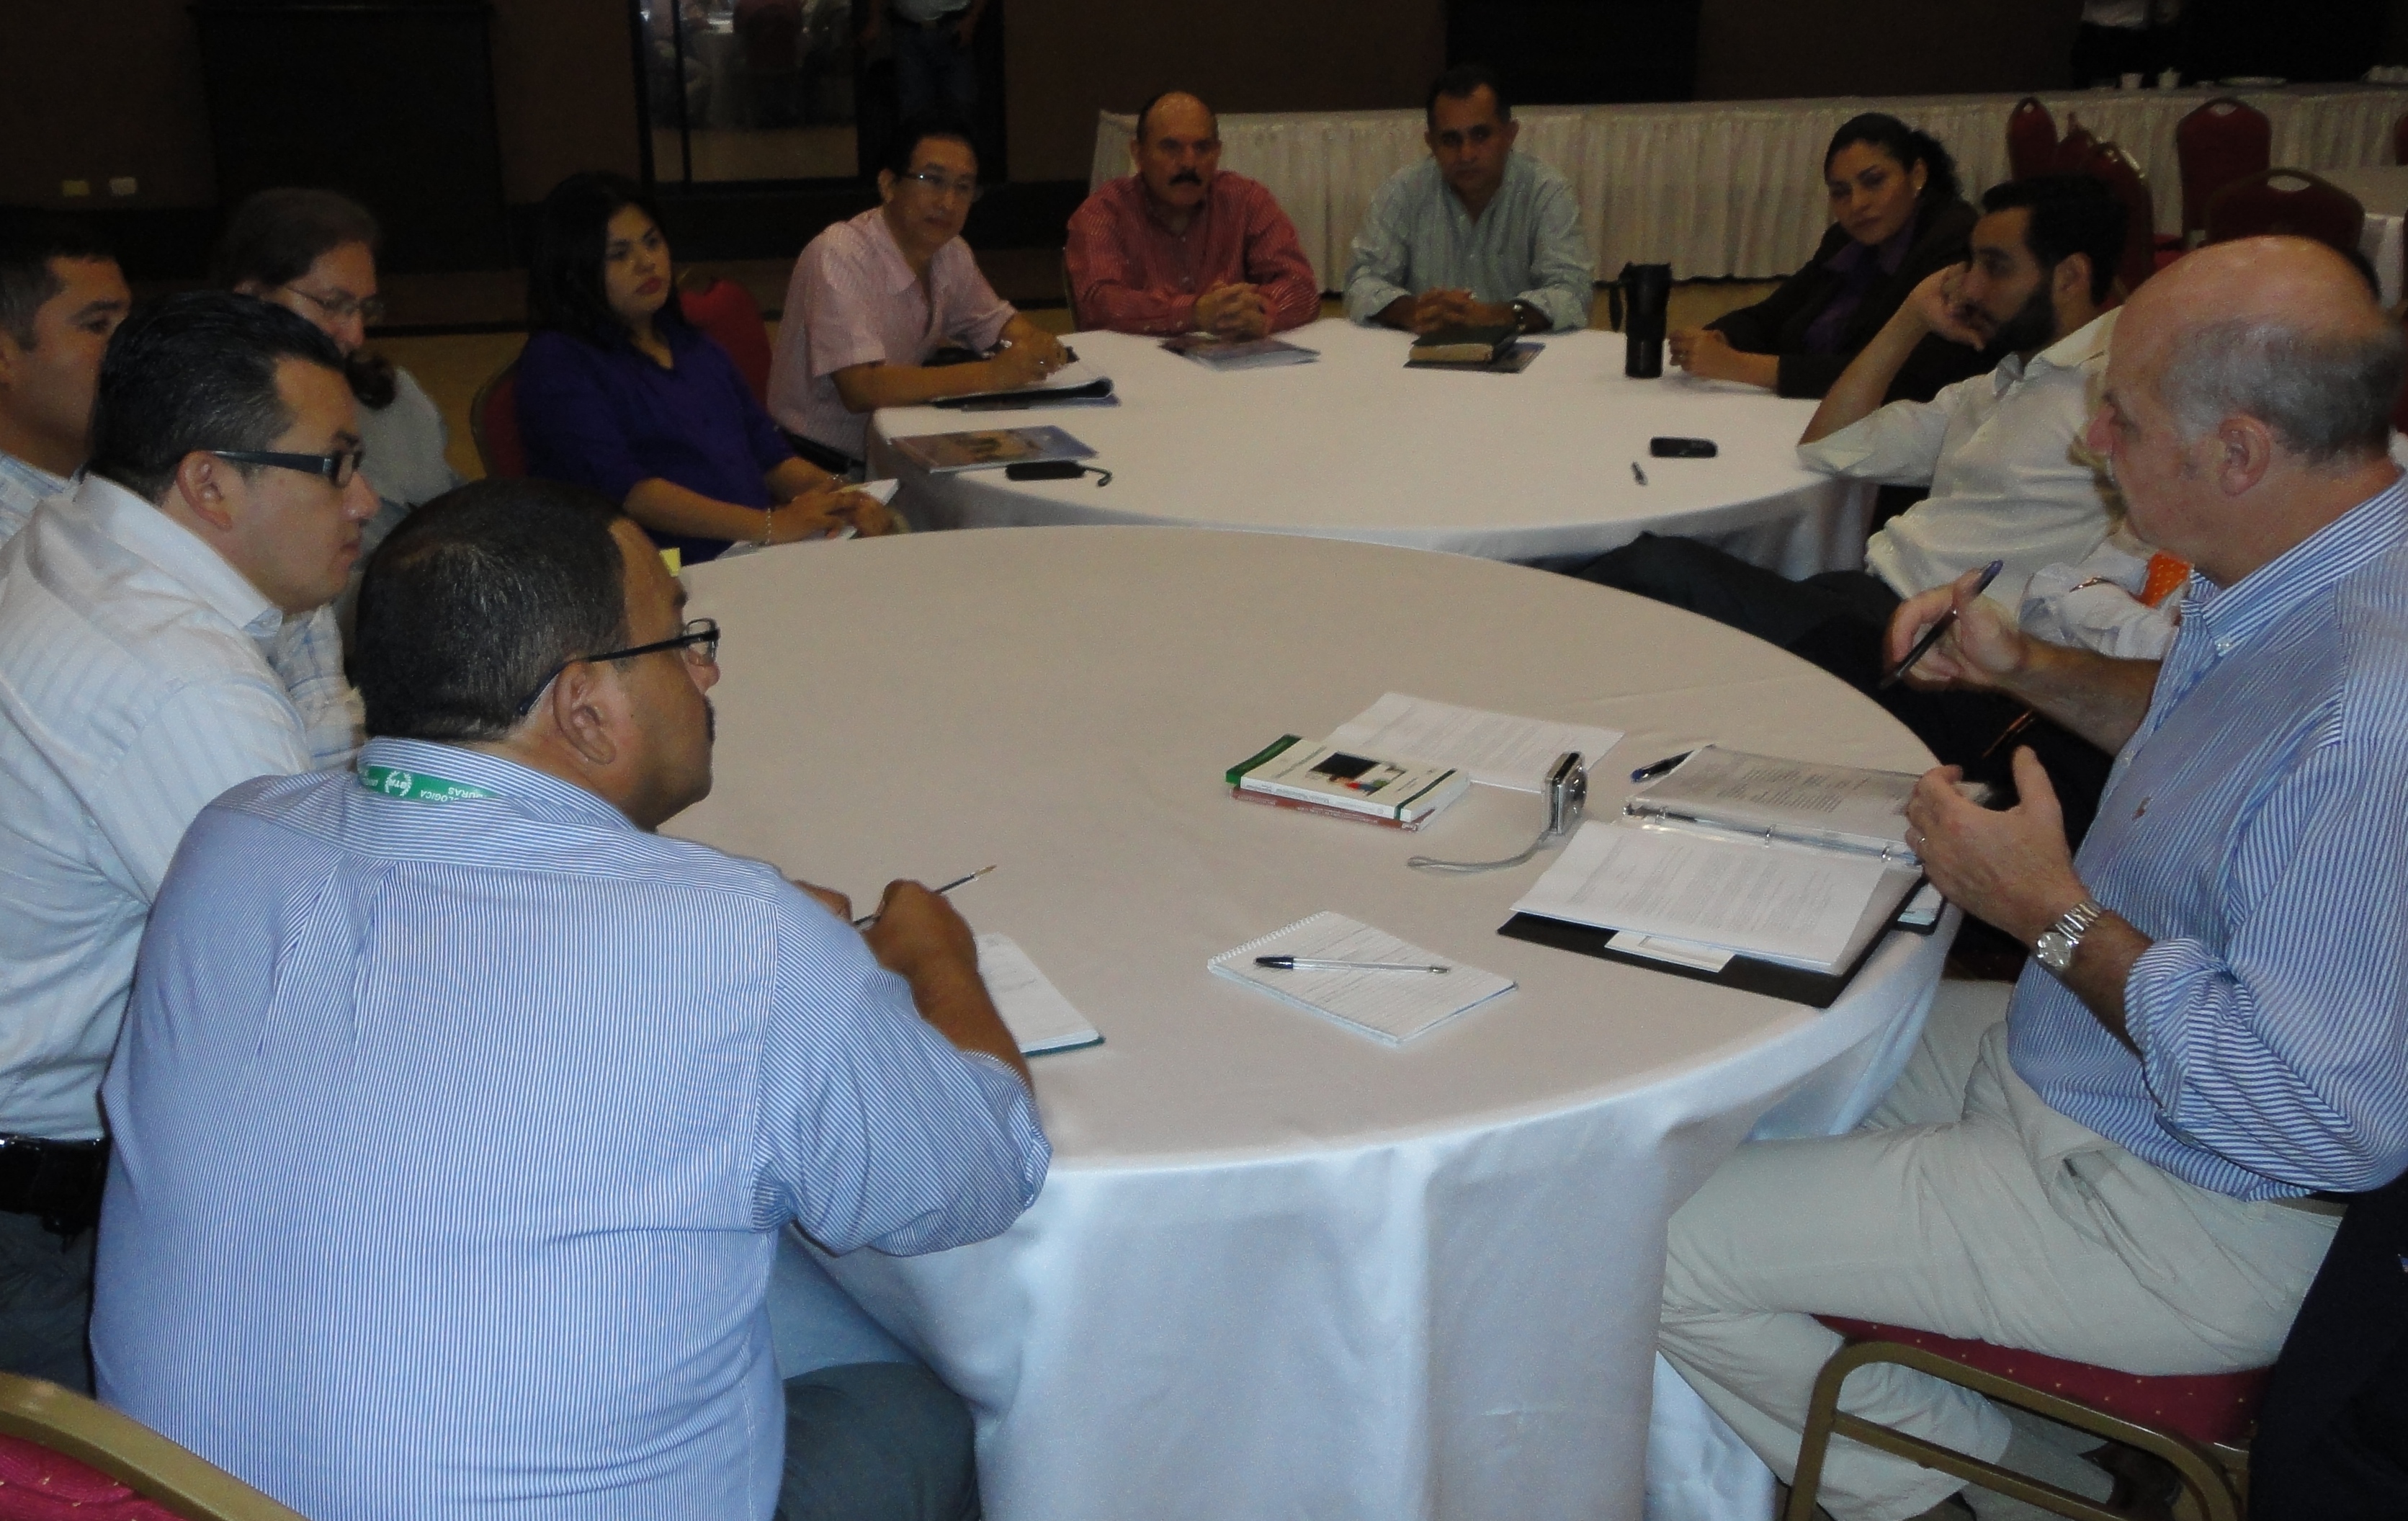 Dr. Alex Chafuen (right) conducts a roundtable session on policy research at the conference in San Pedro Sula.